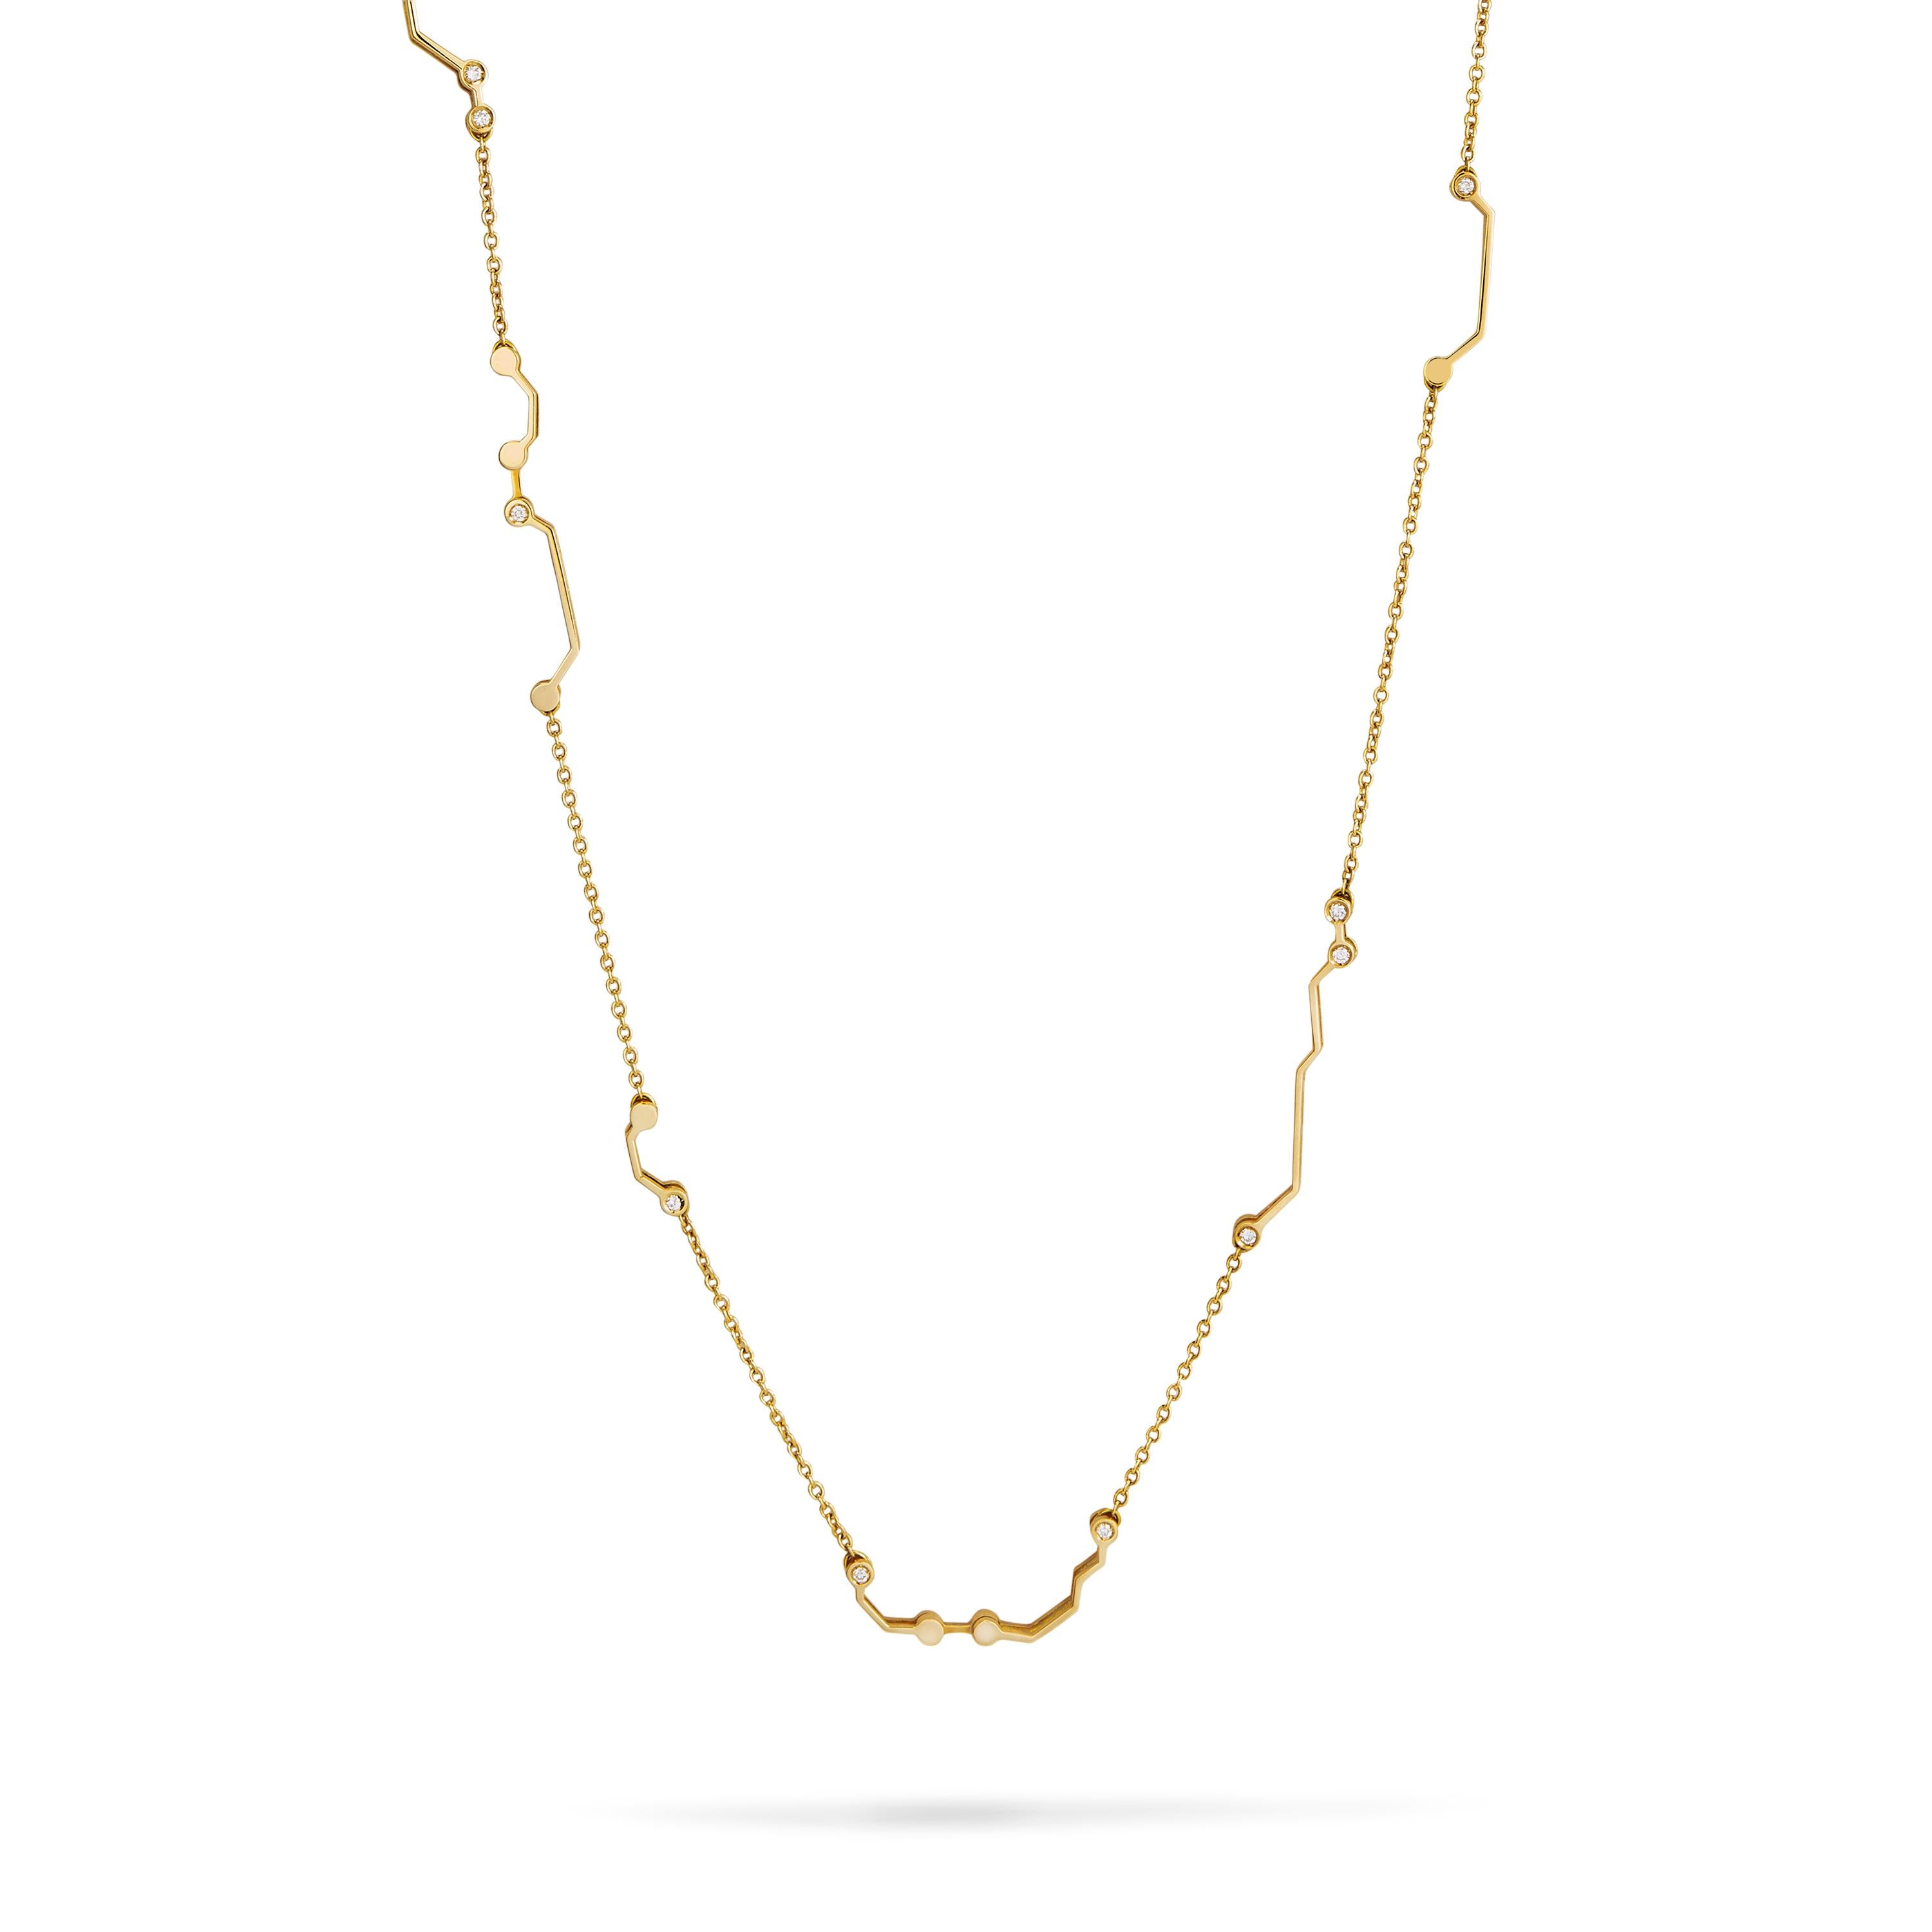 Nathalie Jean Contemporary 0.468 Carat Diamond Yellow Gold Link Chain Necklace For Sale 1